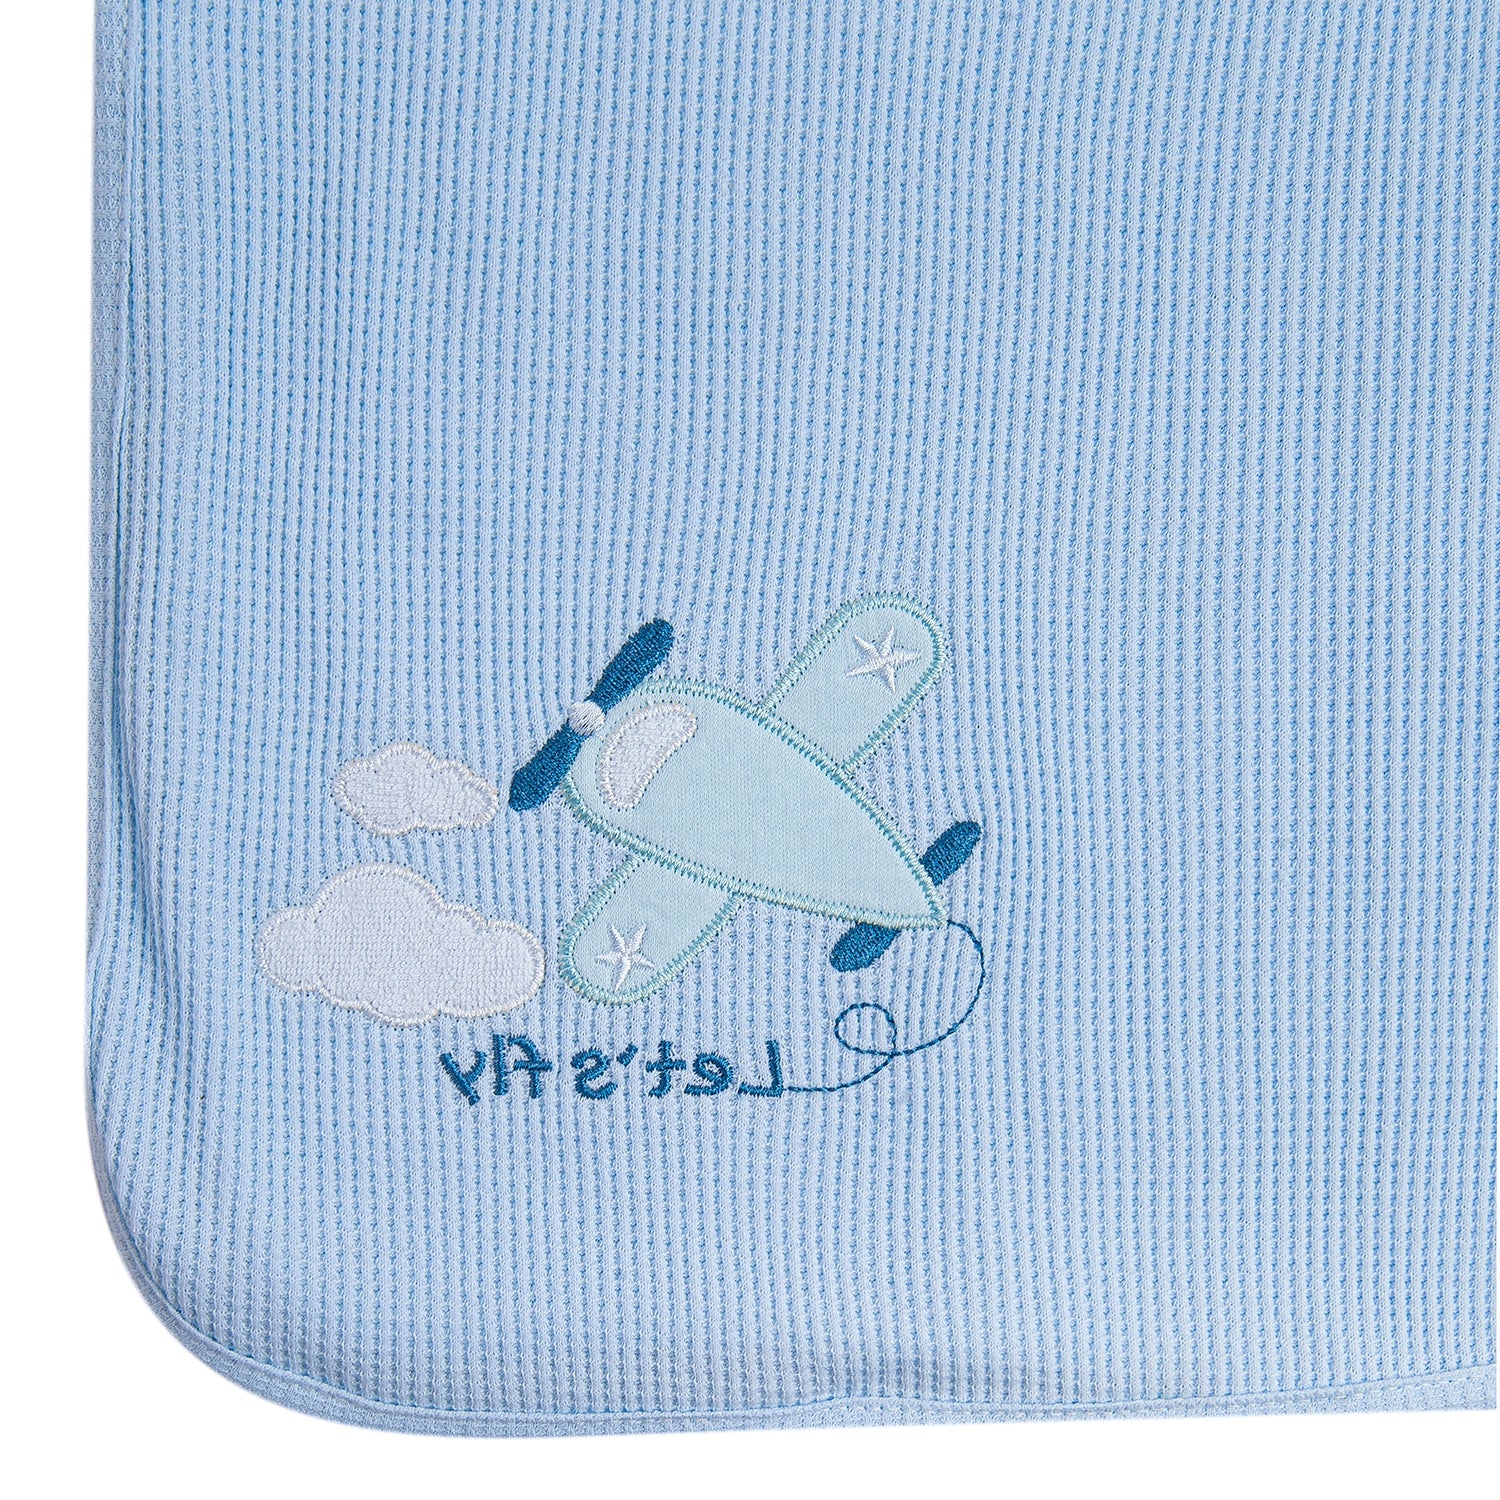 Let's Fly Light Waffle Blanket Blue - Baby Moo